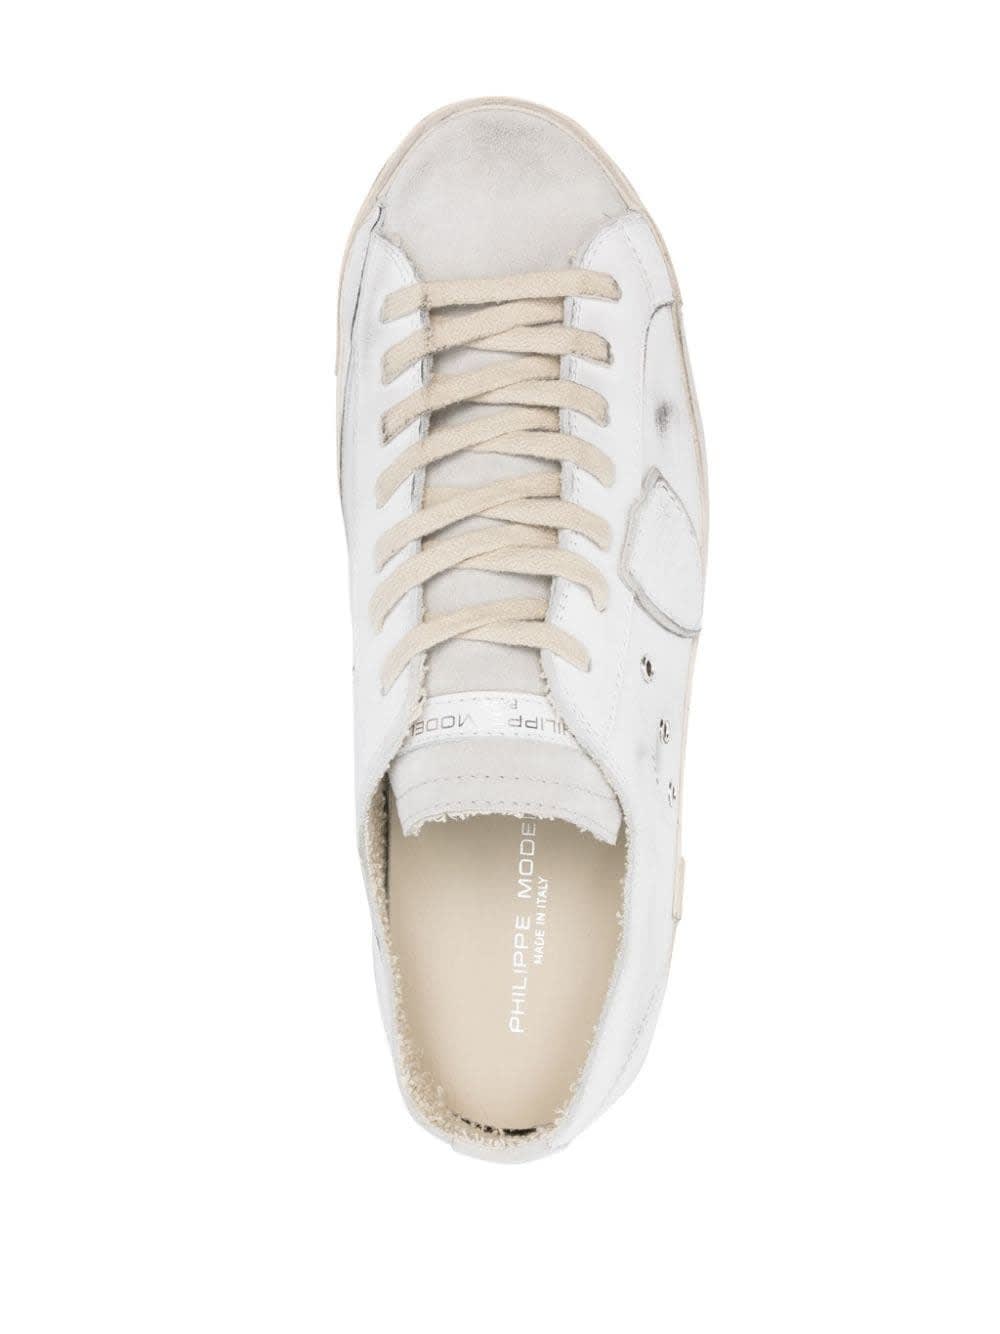 Shop Philippe Model Prsx Low Sneakers - White